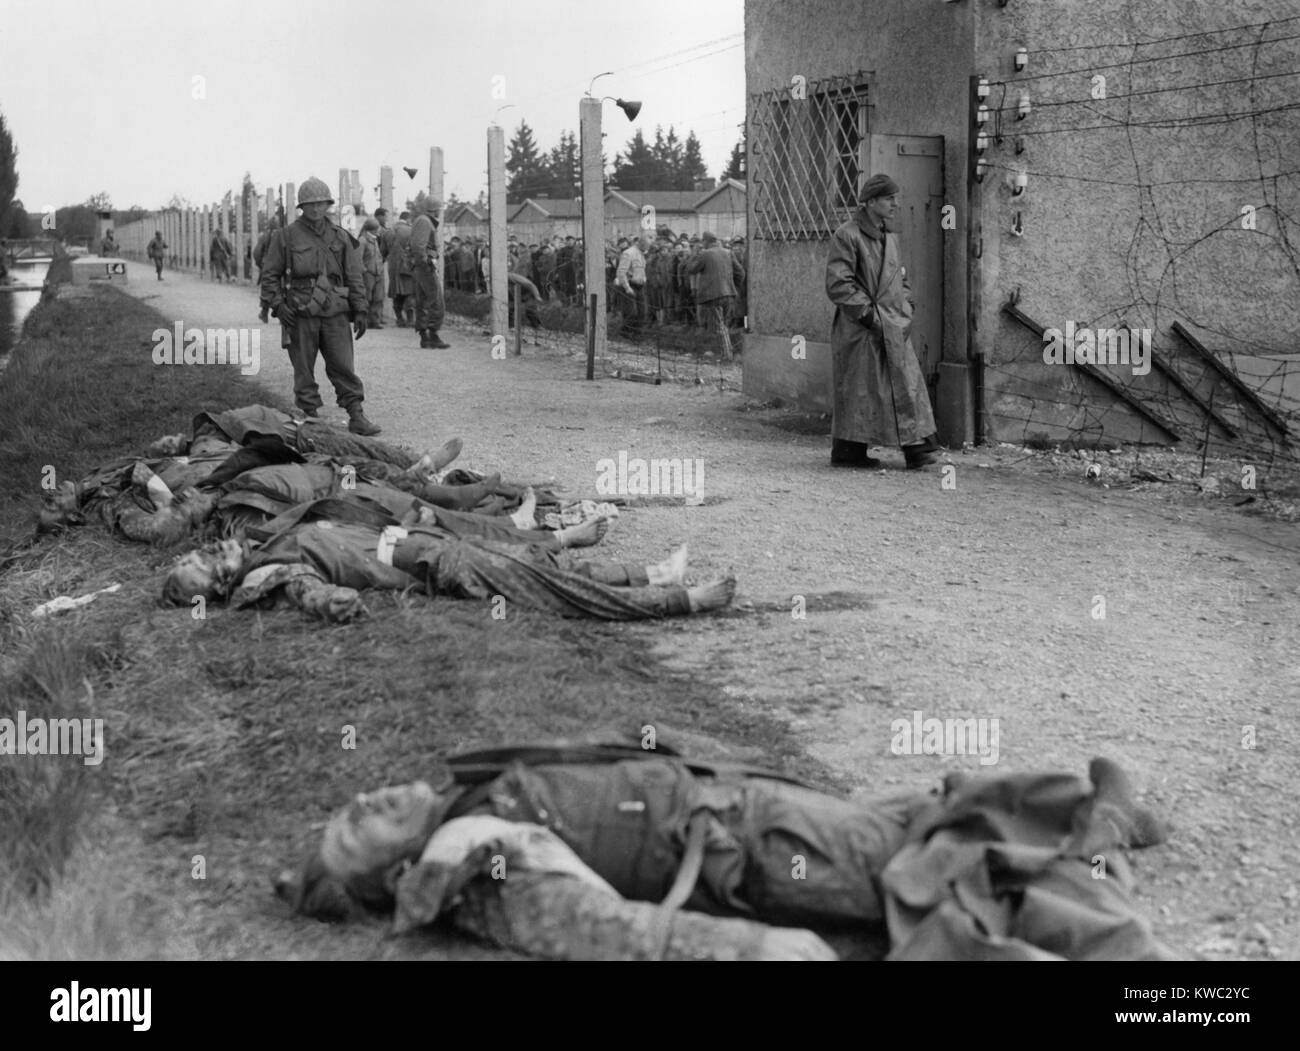 Bodies of former SS guards lie on the bank of a moat surrounding the Dachau Concentration Camp. Liberated prisoner's killed the guards by beating them to death. Seventh US Army soldiers patrolled the area and checked liberated prisoners in the barbed wire enclosure. April 29, 1945, World War 2 (BSLOC_2015_13_15) Stock Photo